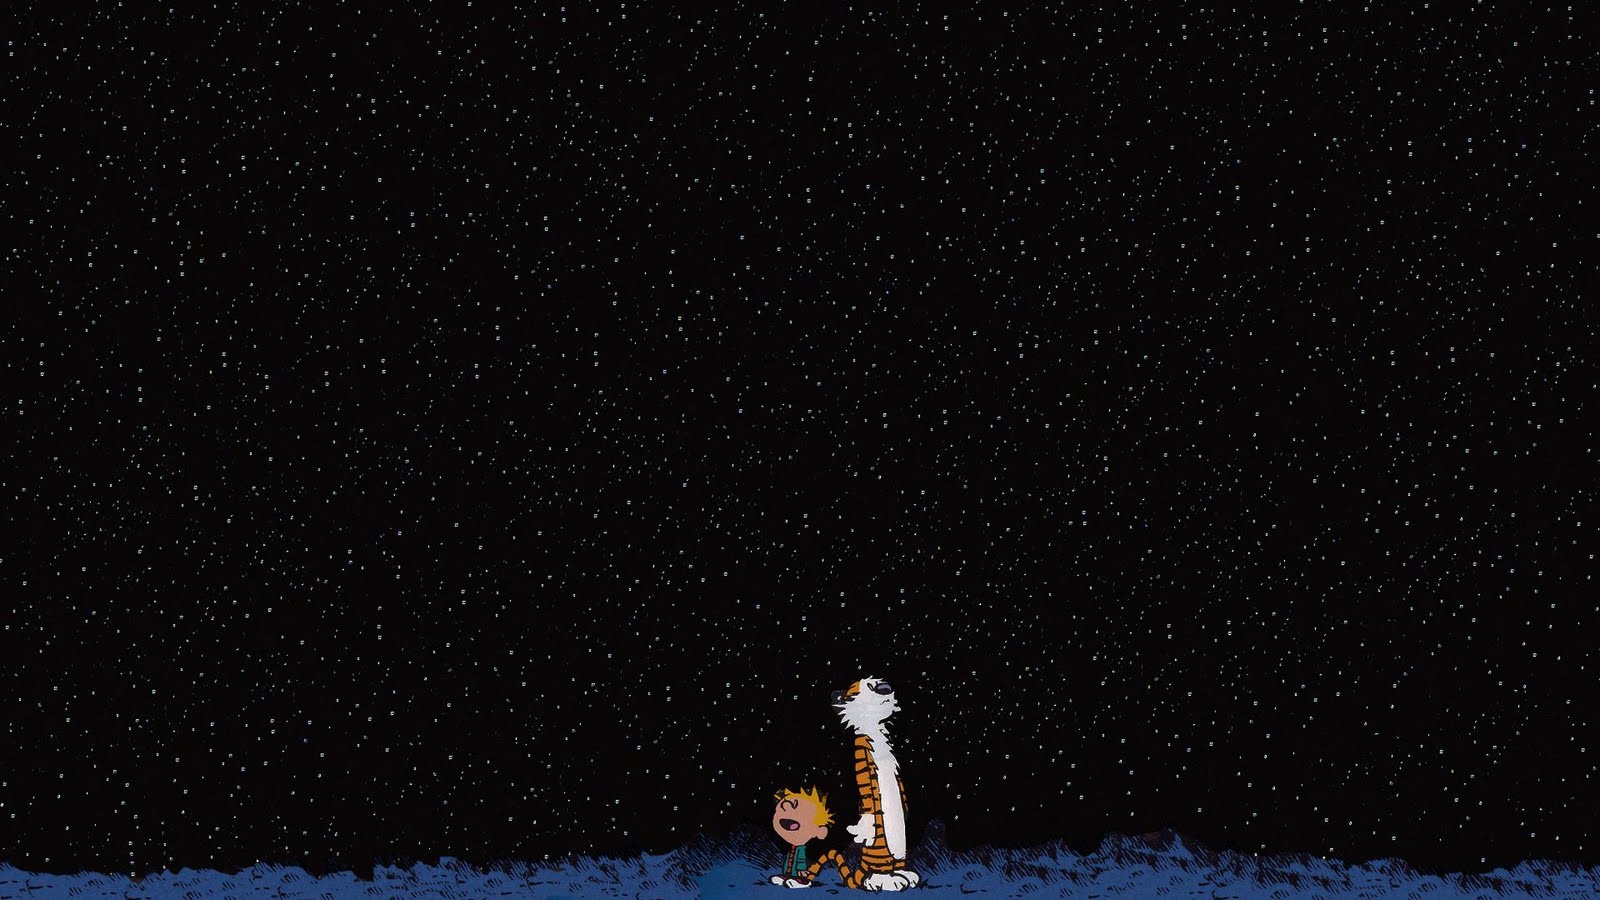 Own Calvin And Hobbes For The First Time Ever